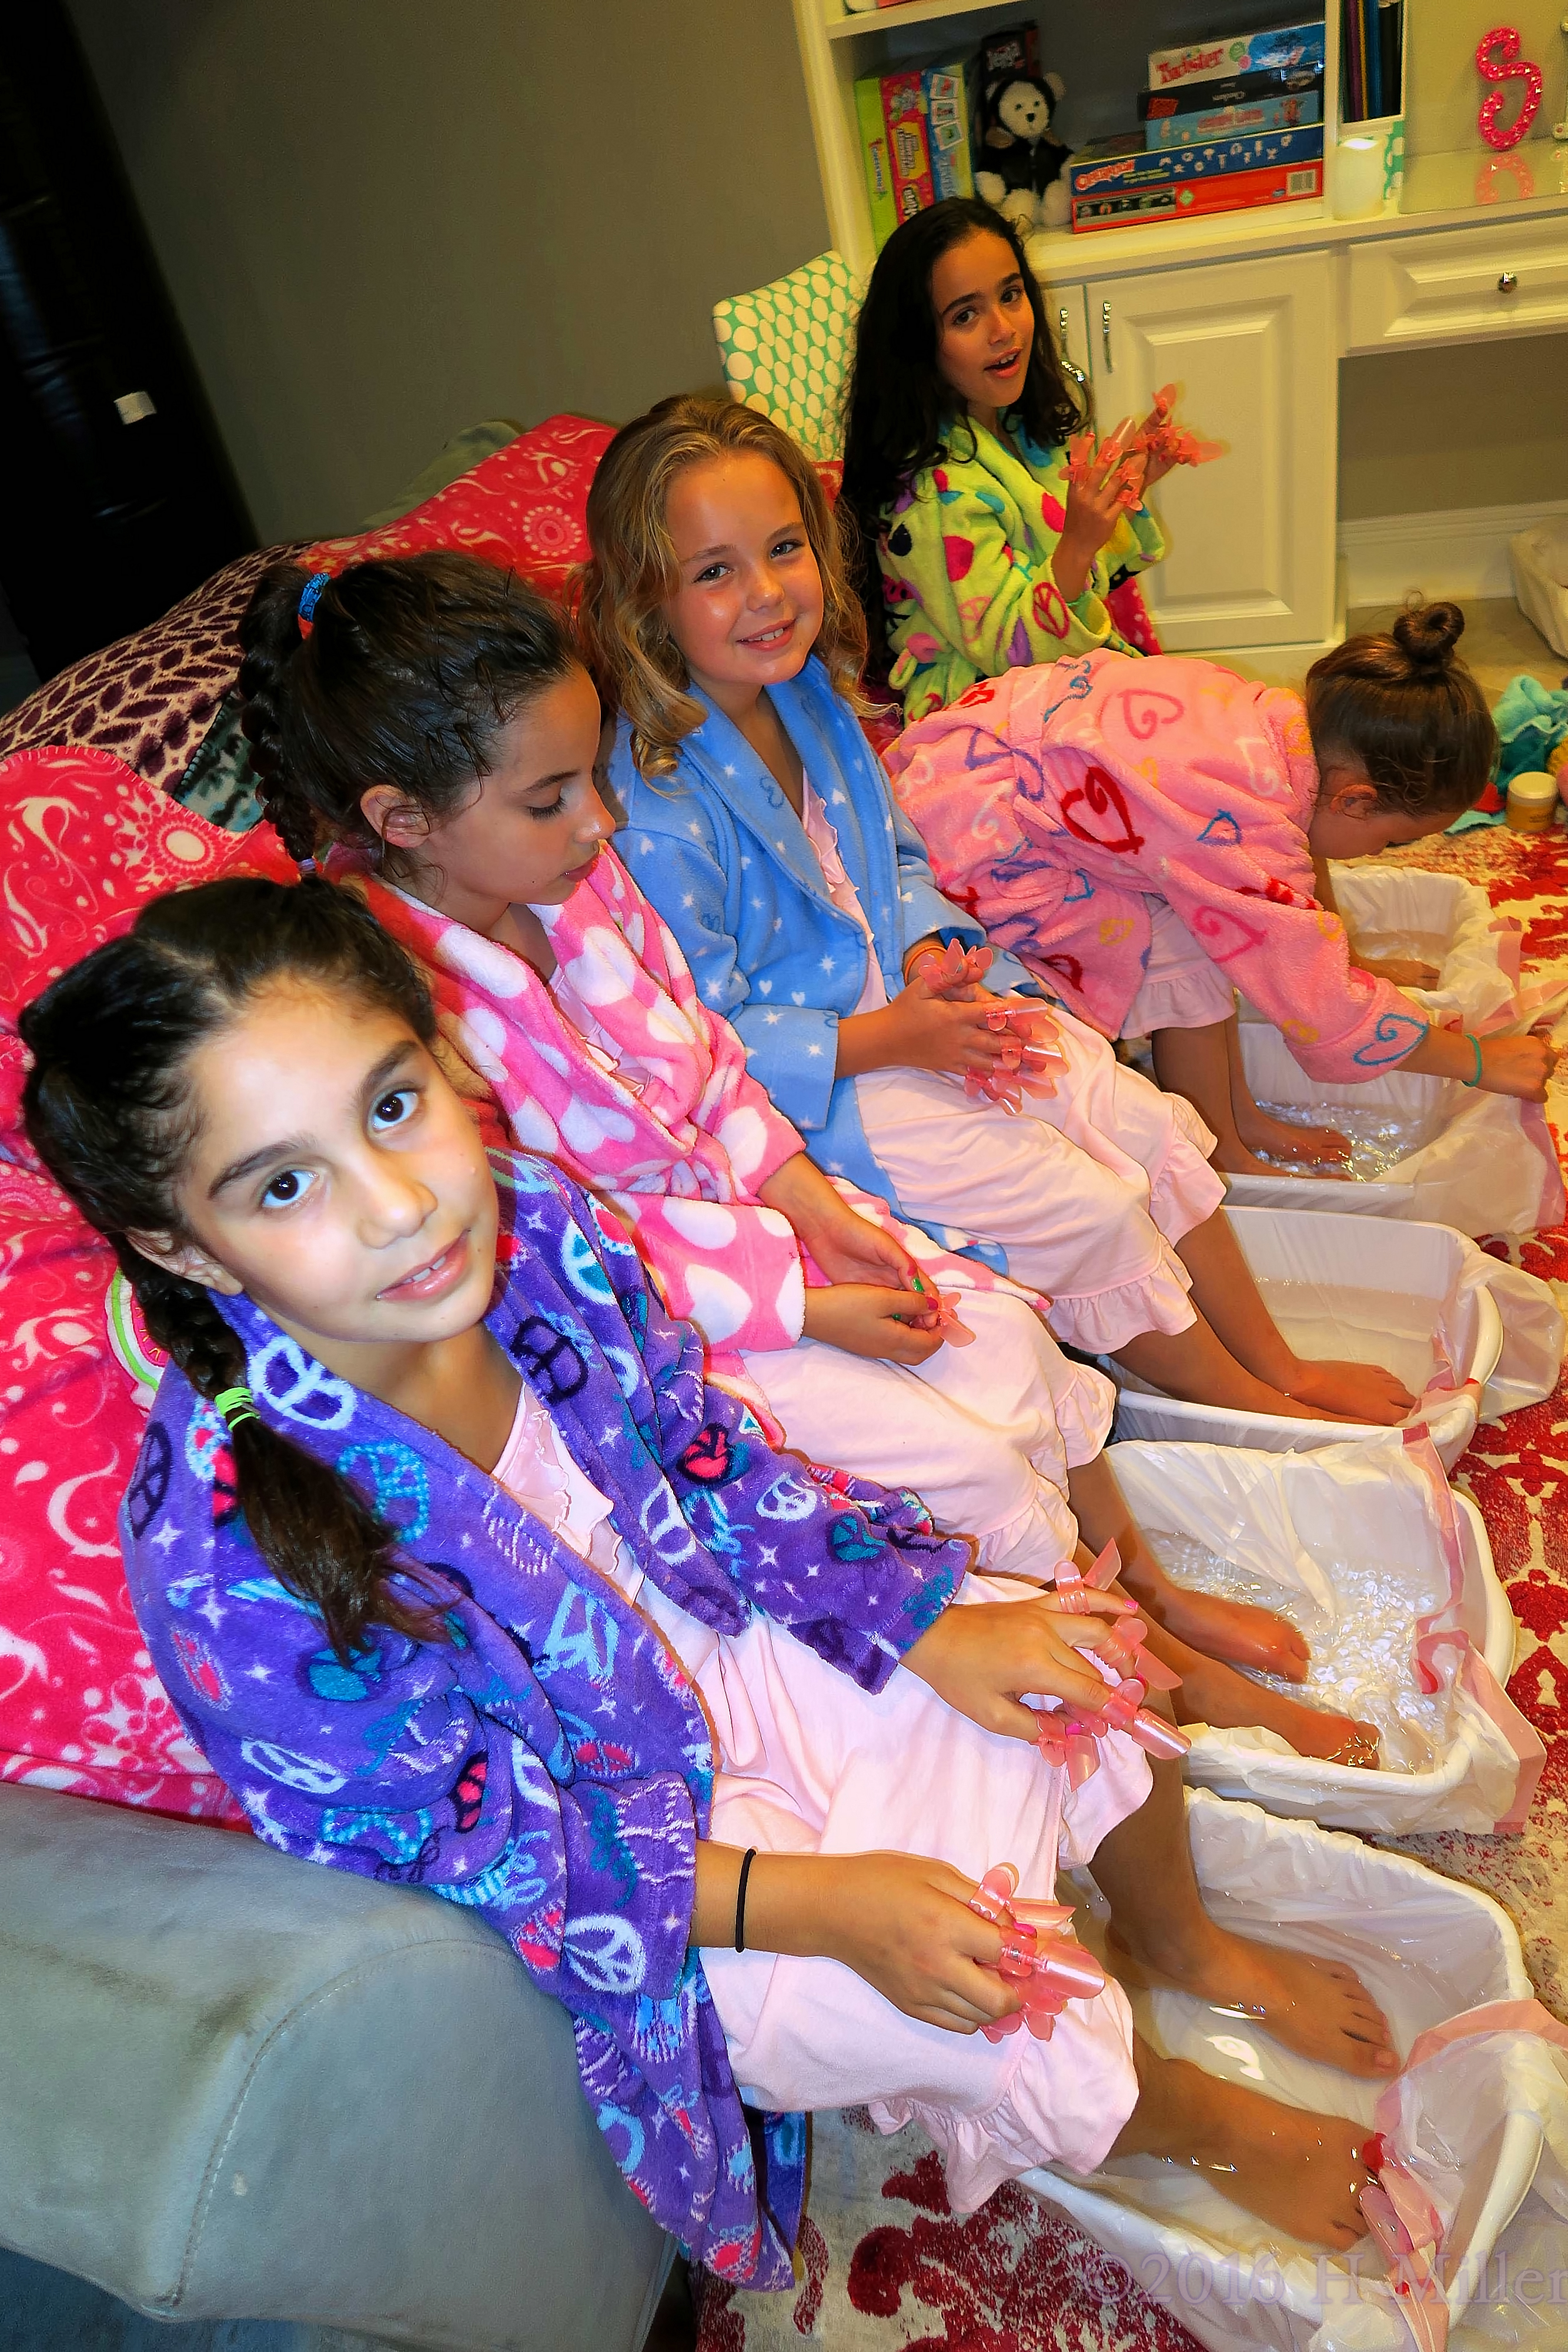 Kids Spa Party For Annual Sleepunder In New Jersey Gallery 2 